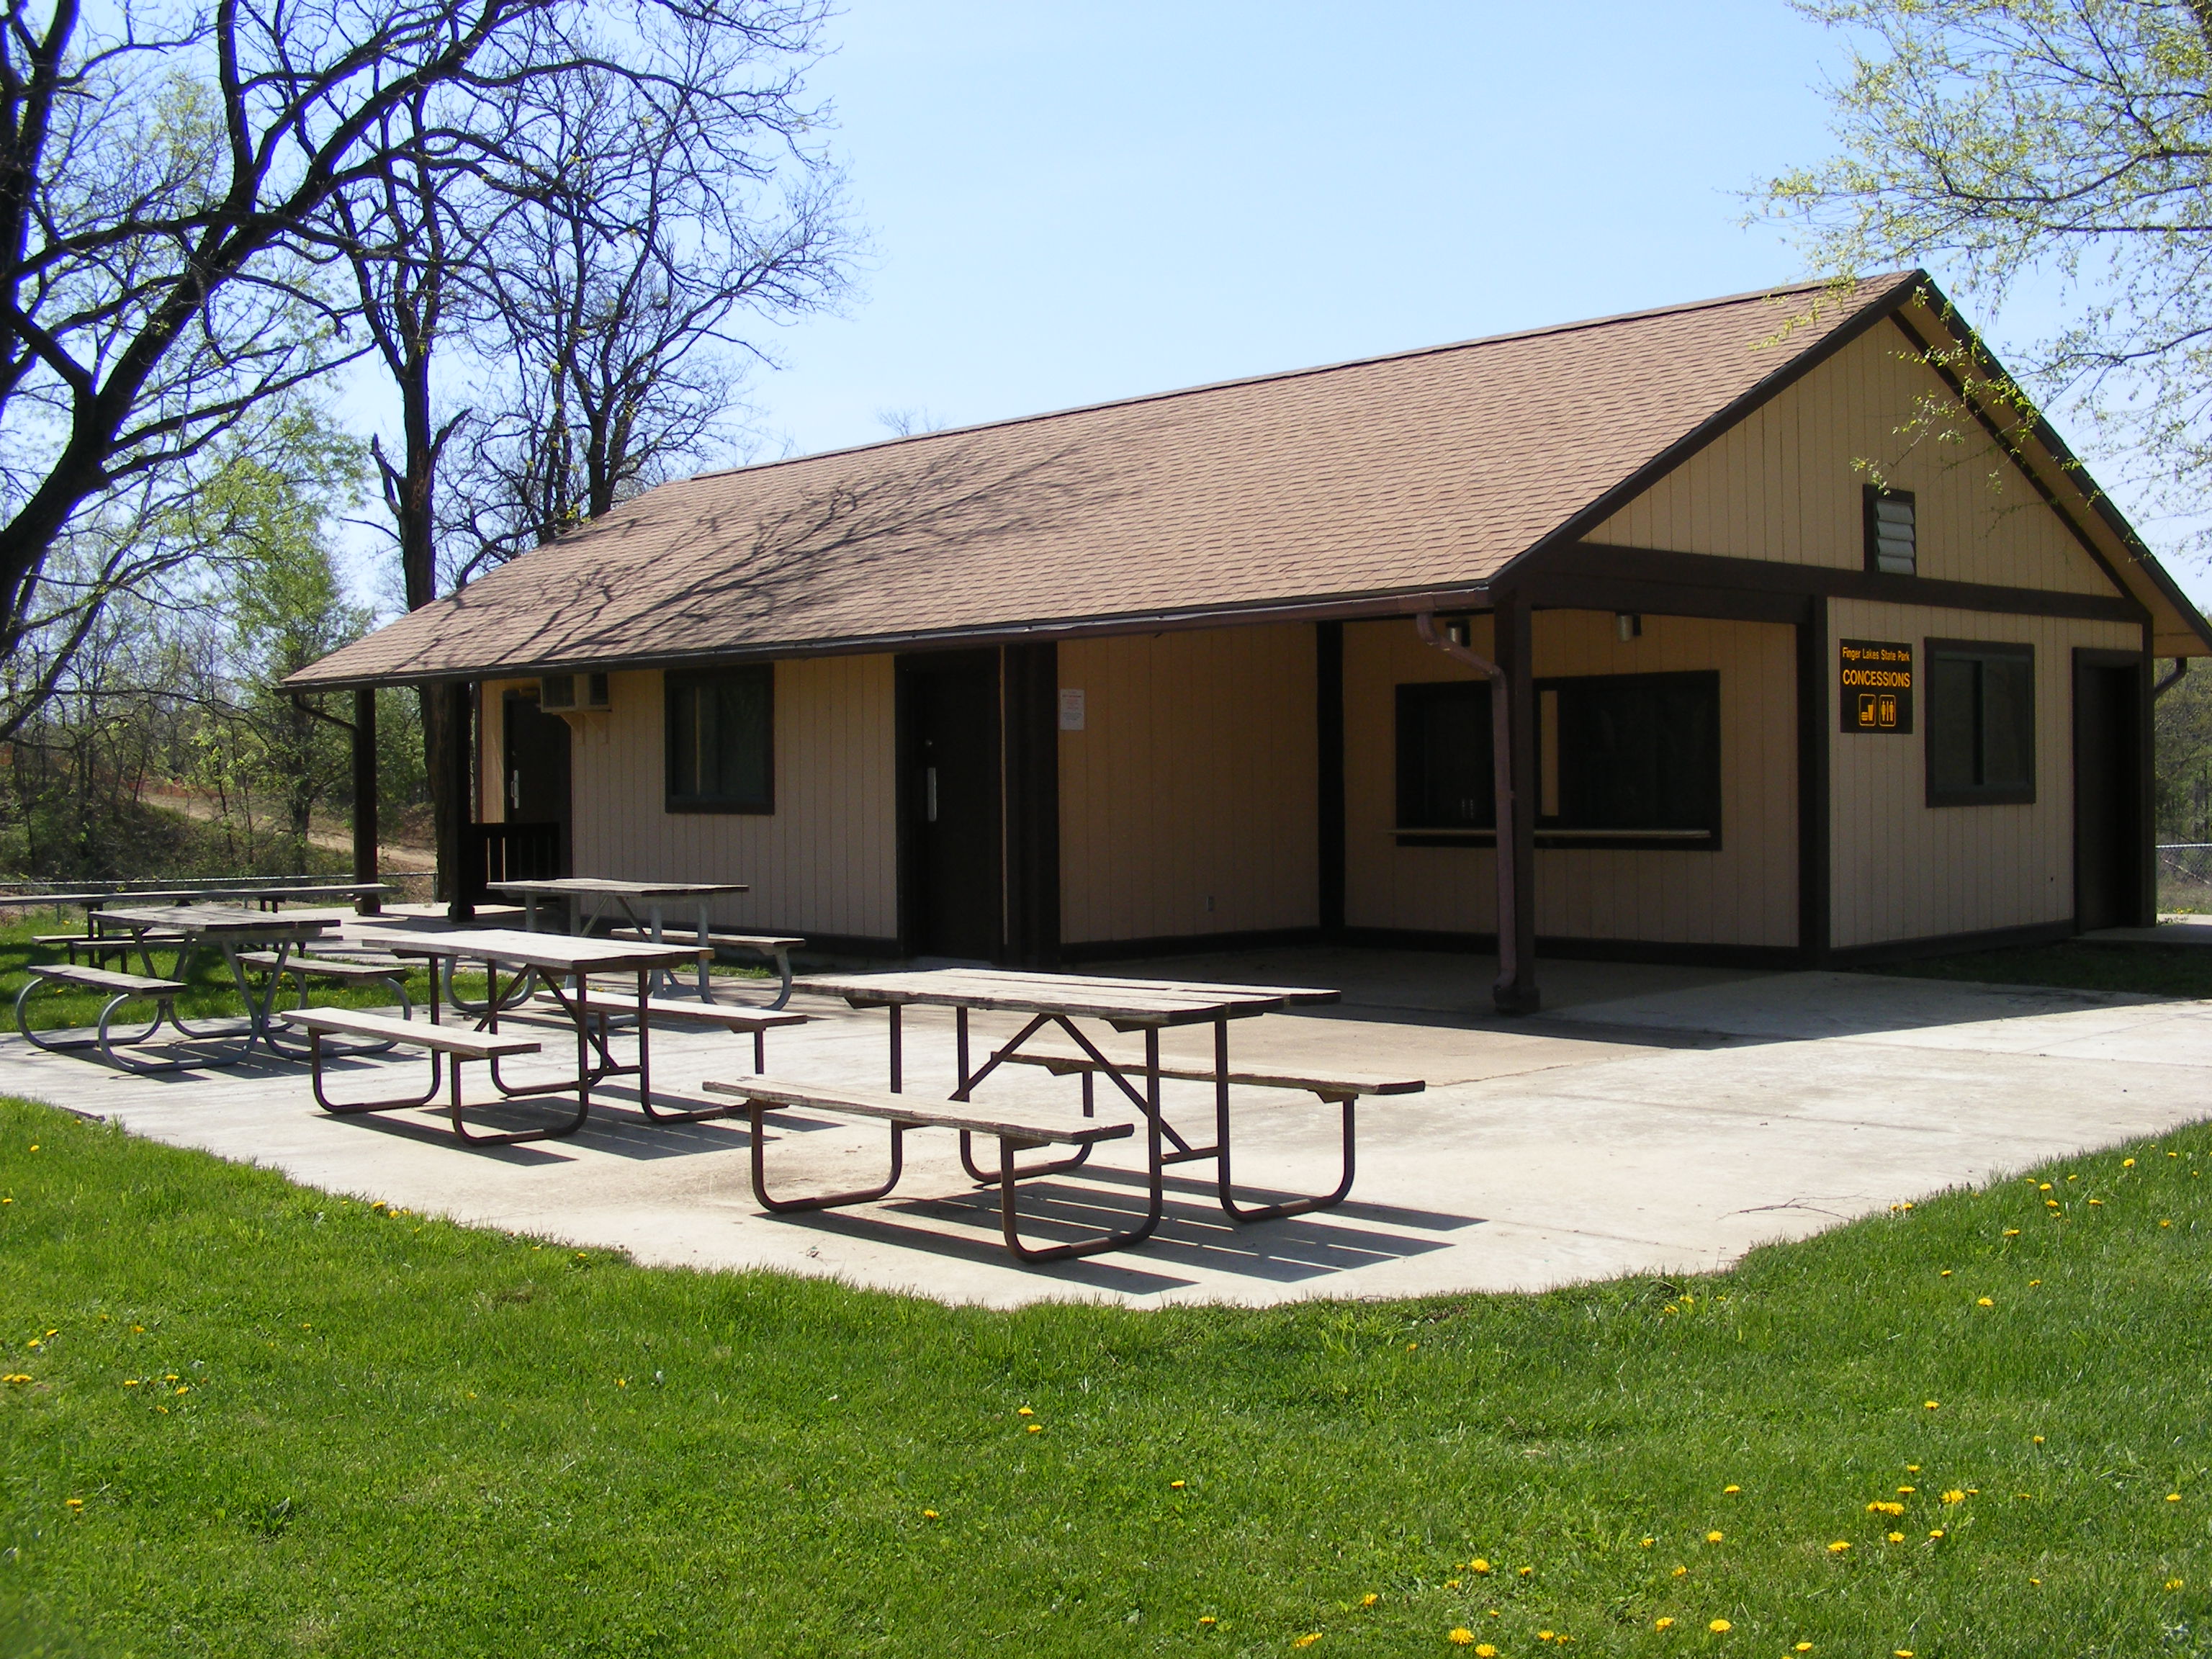 Picnic tables and exterior of the enclosed shelter